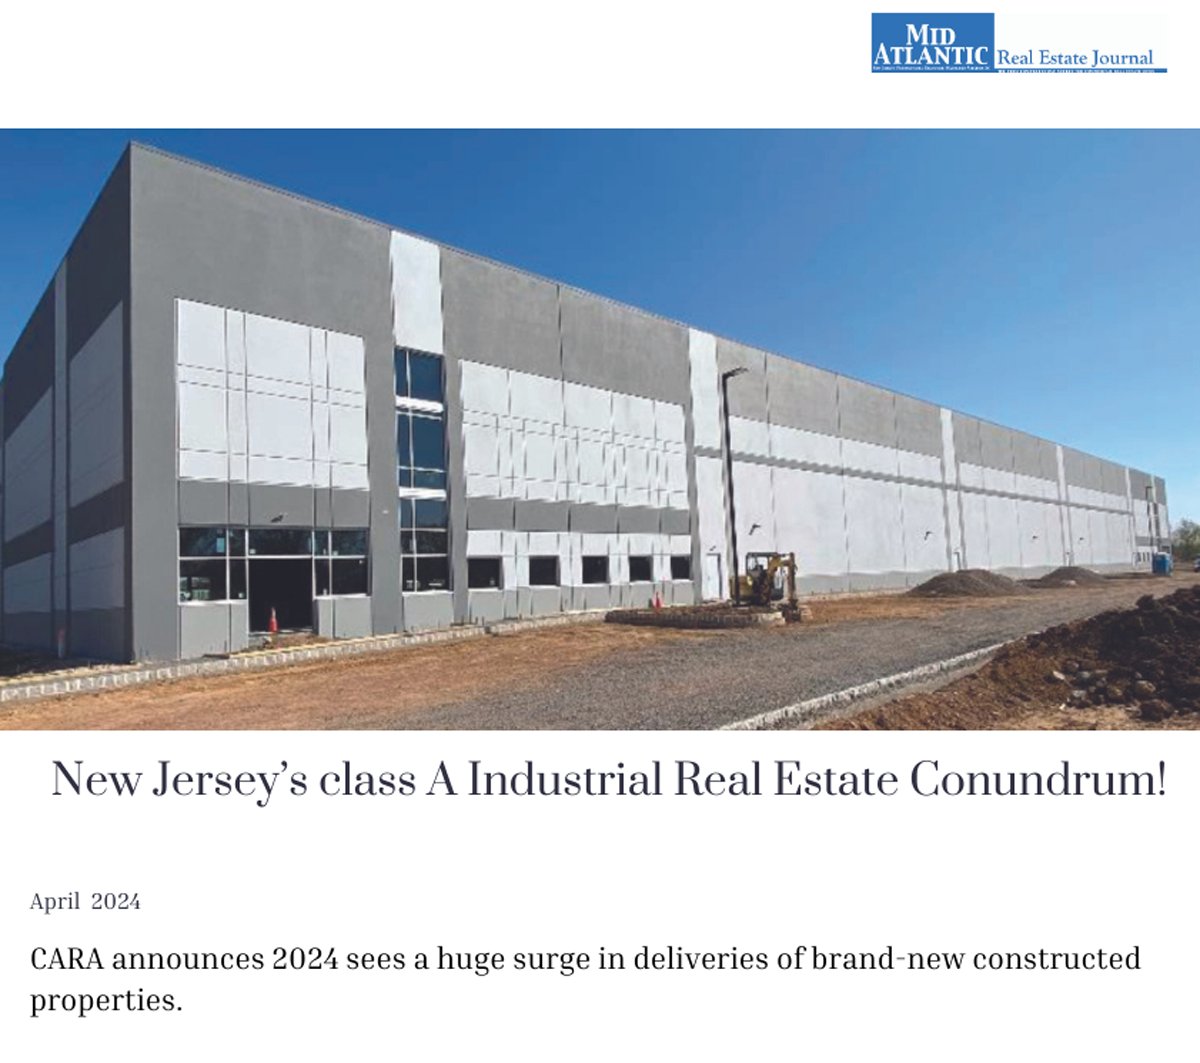 #CARA announces a surge in deliveries of brand-new constructed properties in 2024. With 19.2 million s/f of industrial space under construction, the market dynamics are shifting. Read more: tinyurl.com/CARA-NNJ #IndustrialRealEstate #NewJersey #MarketTrends